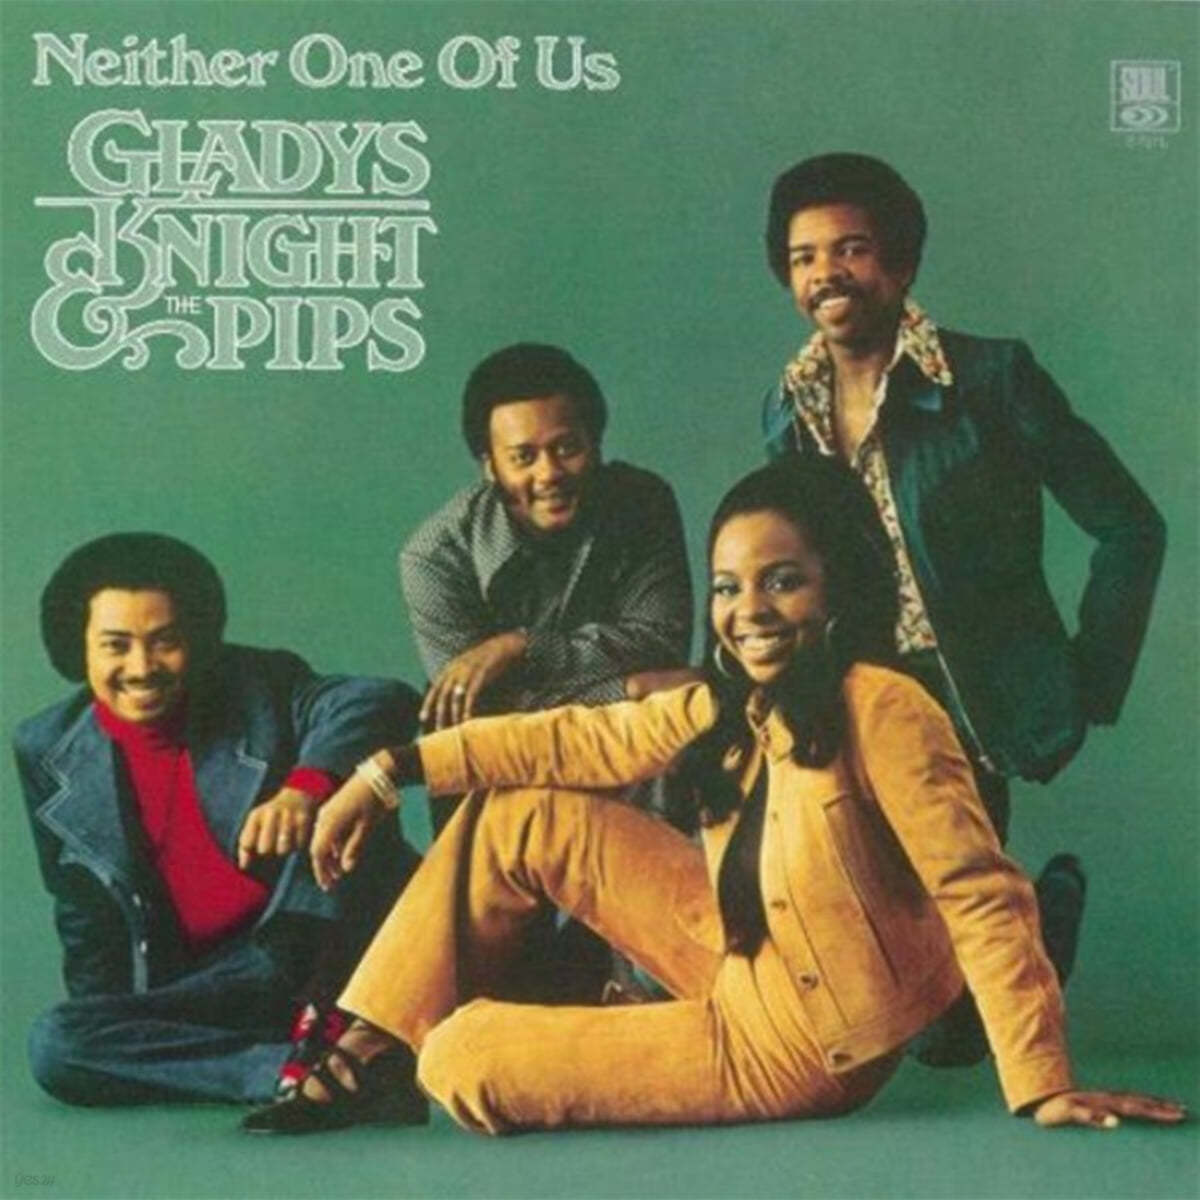 Gladys Knight & The Pips (글래디스 나이트 앤드 더 핍스) - Neither One Of Us 